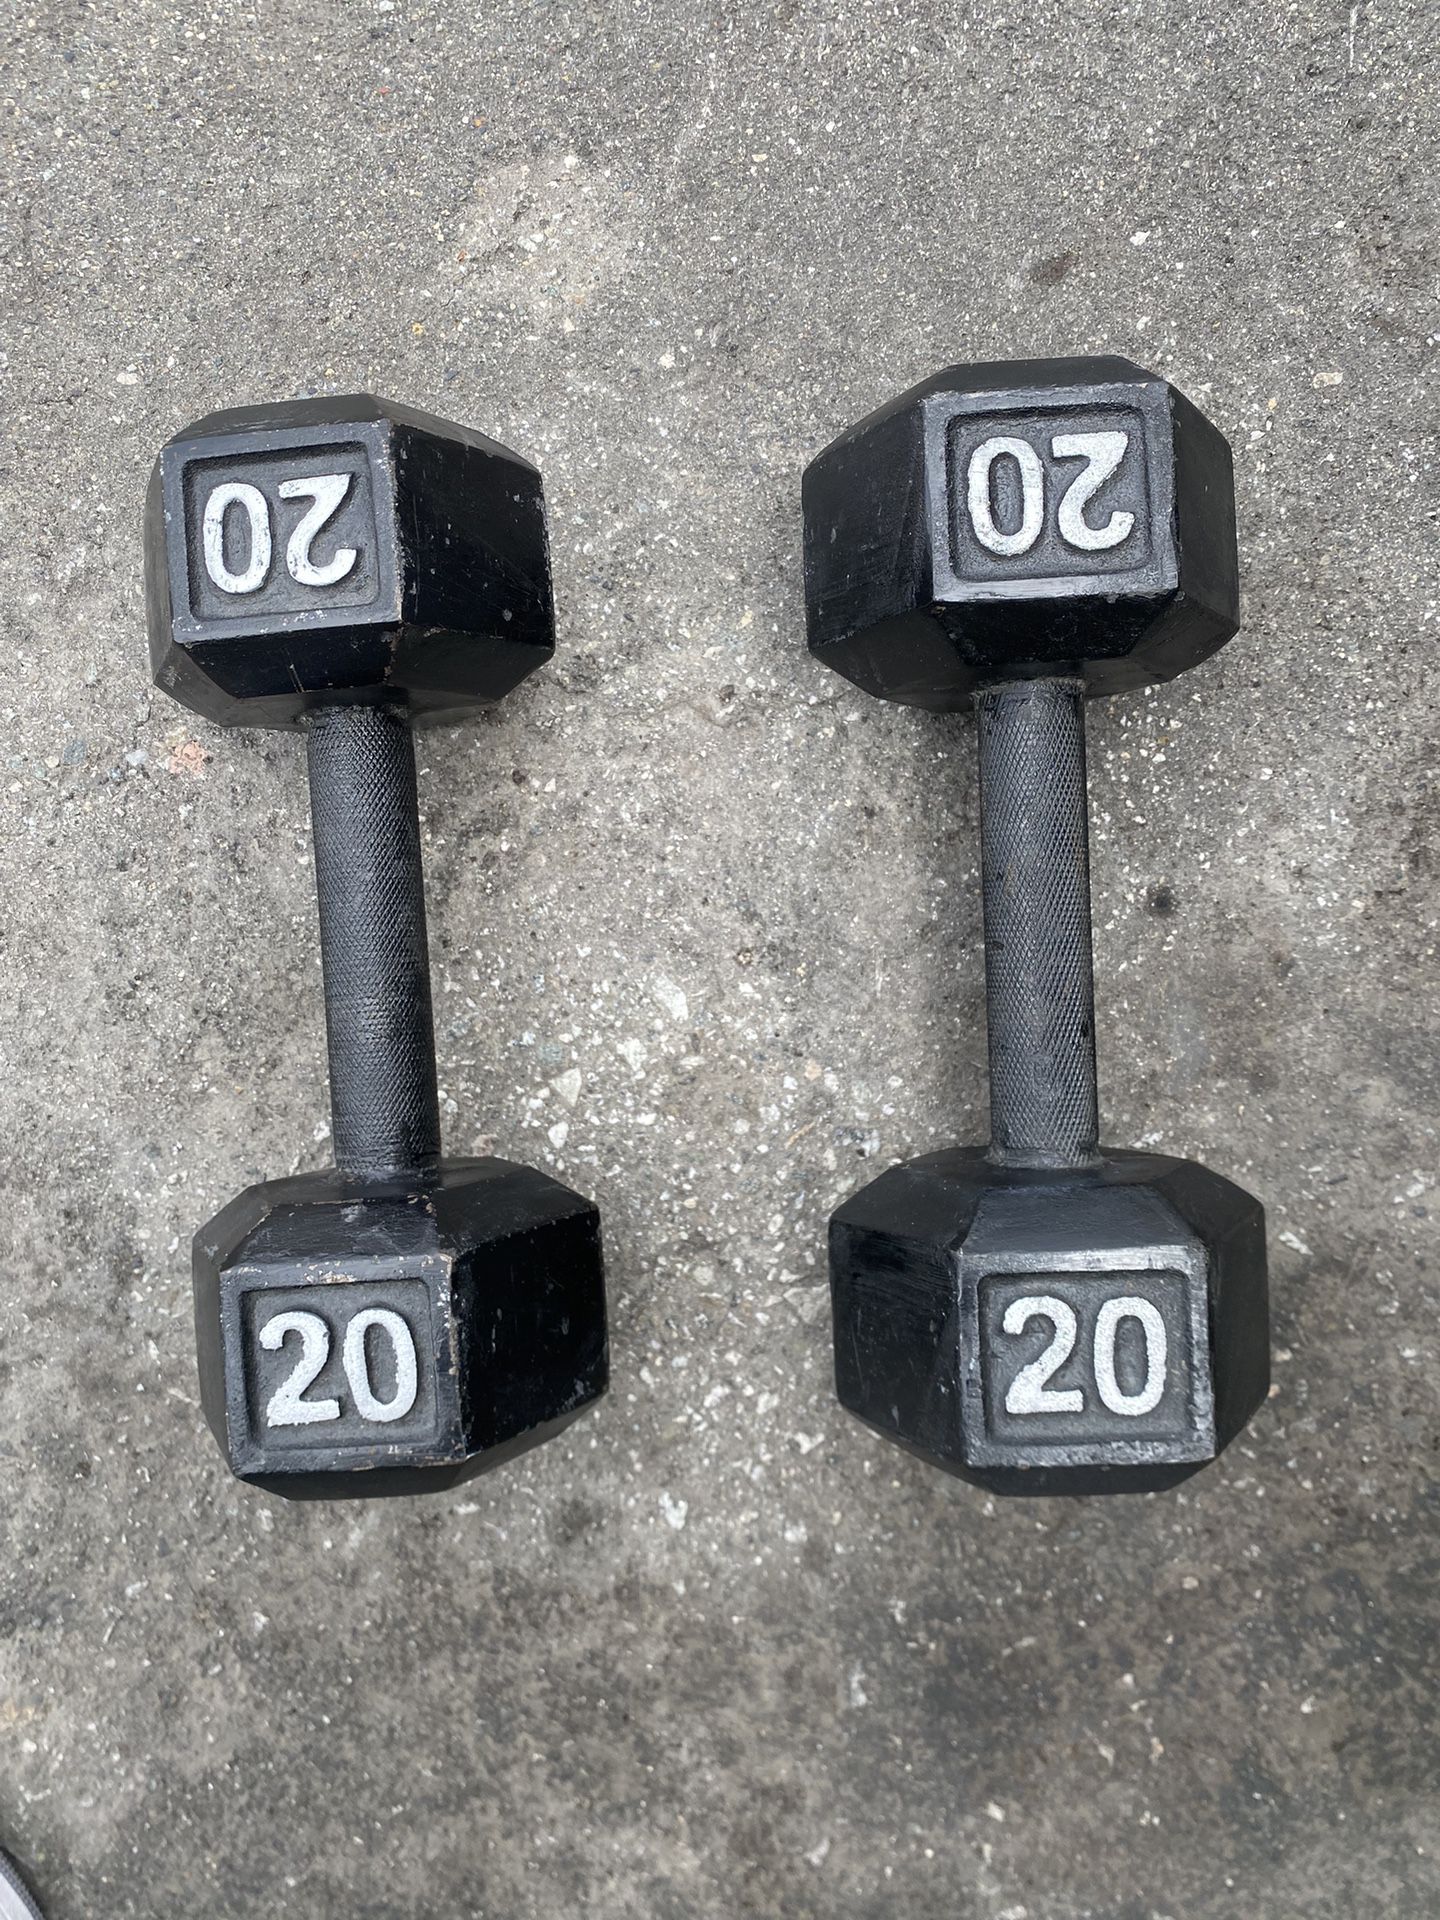 Dumbbells To Workout Very Heavy $45 For Both